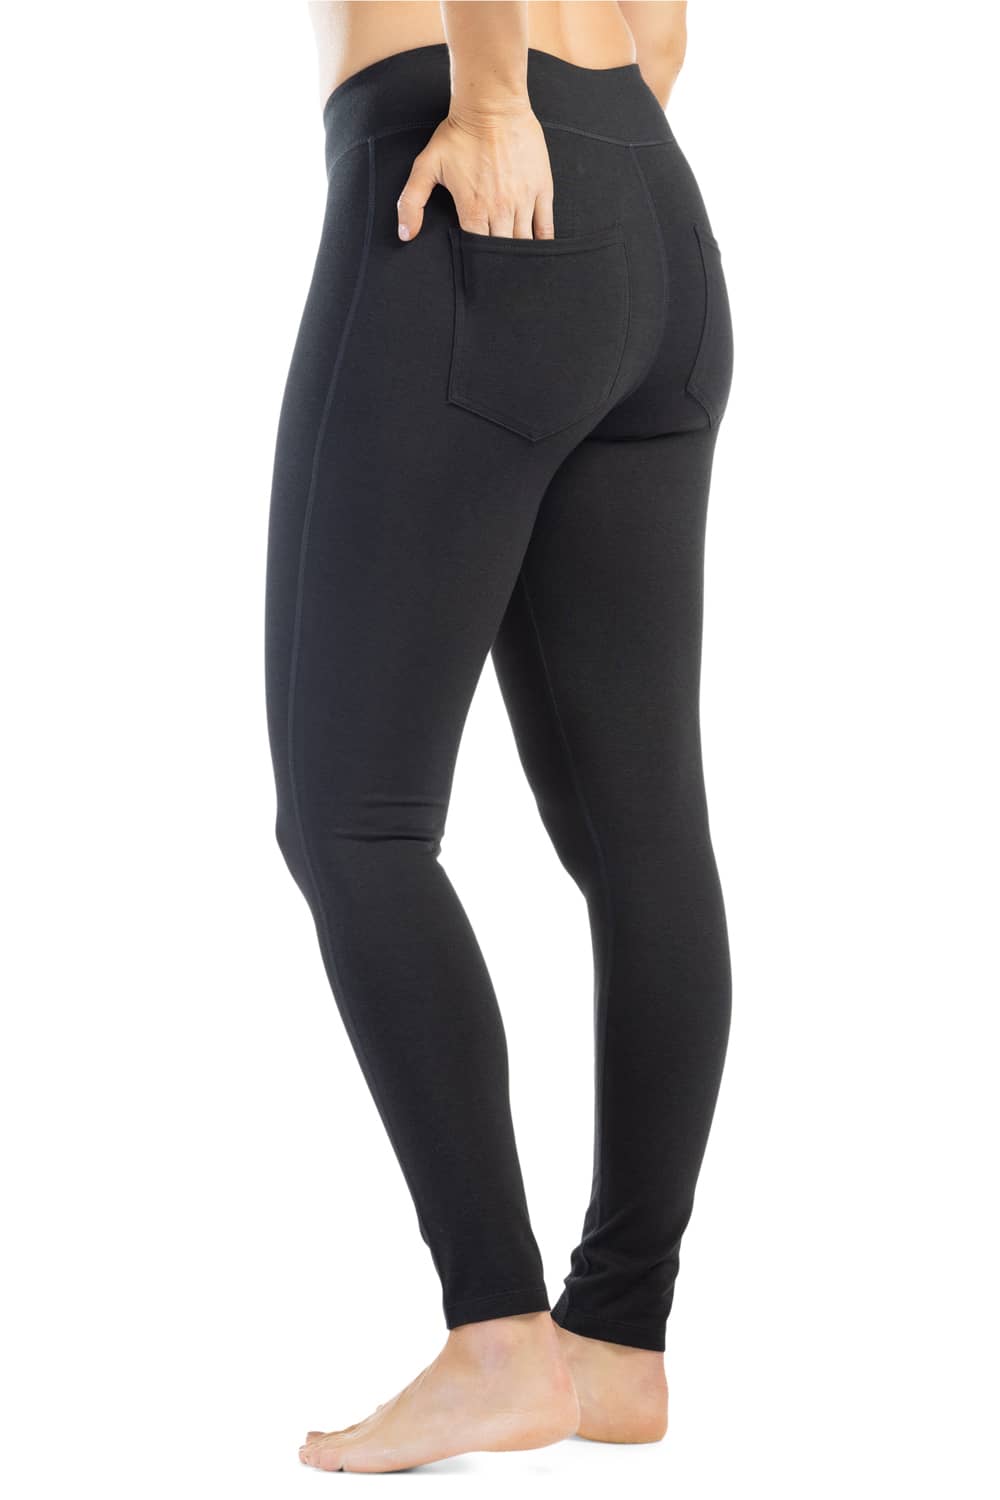 Yoga Pants with Pockets from Yoga Leggs